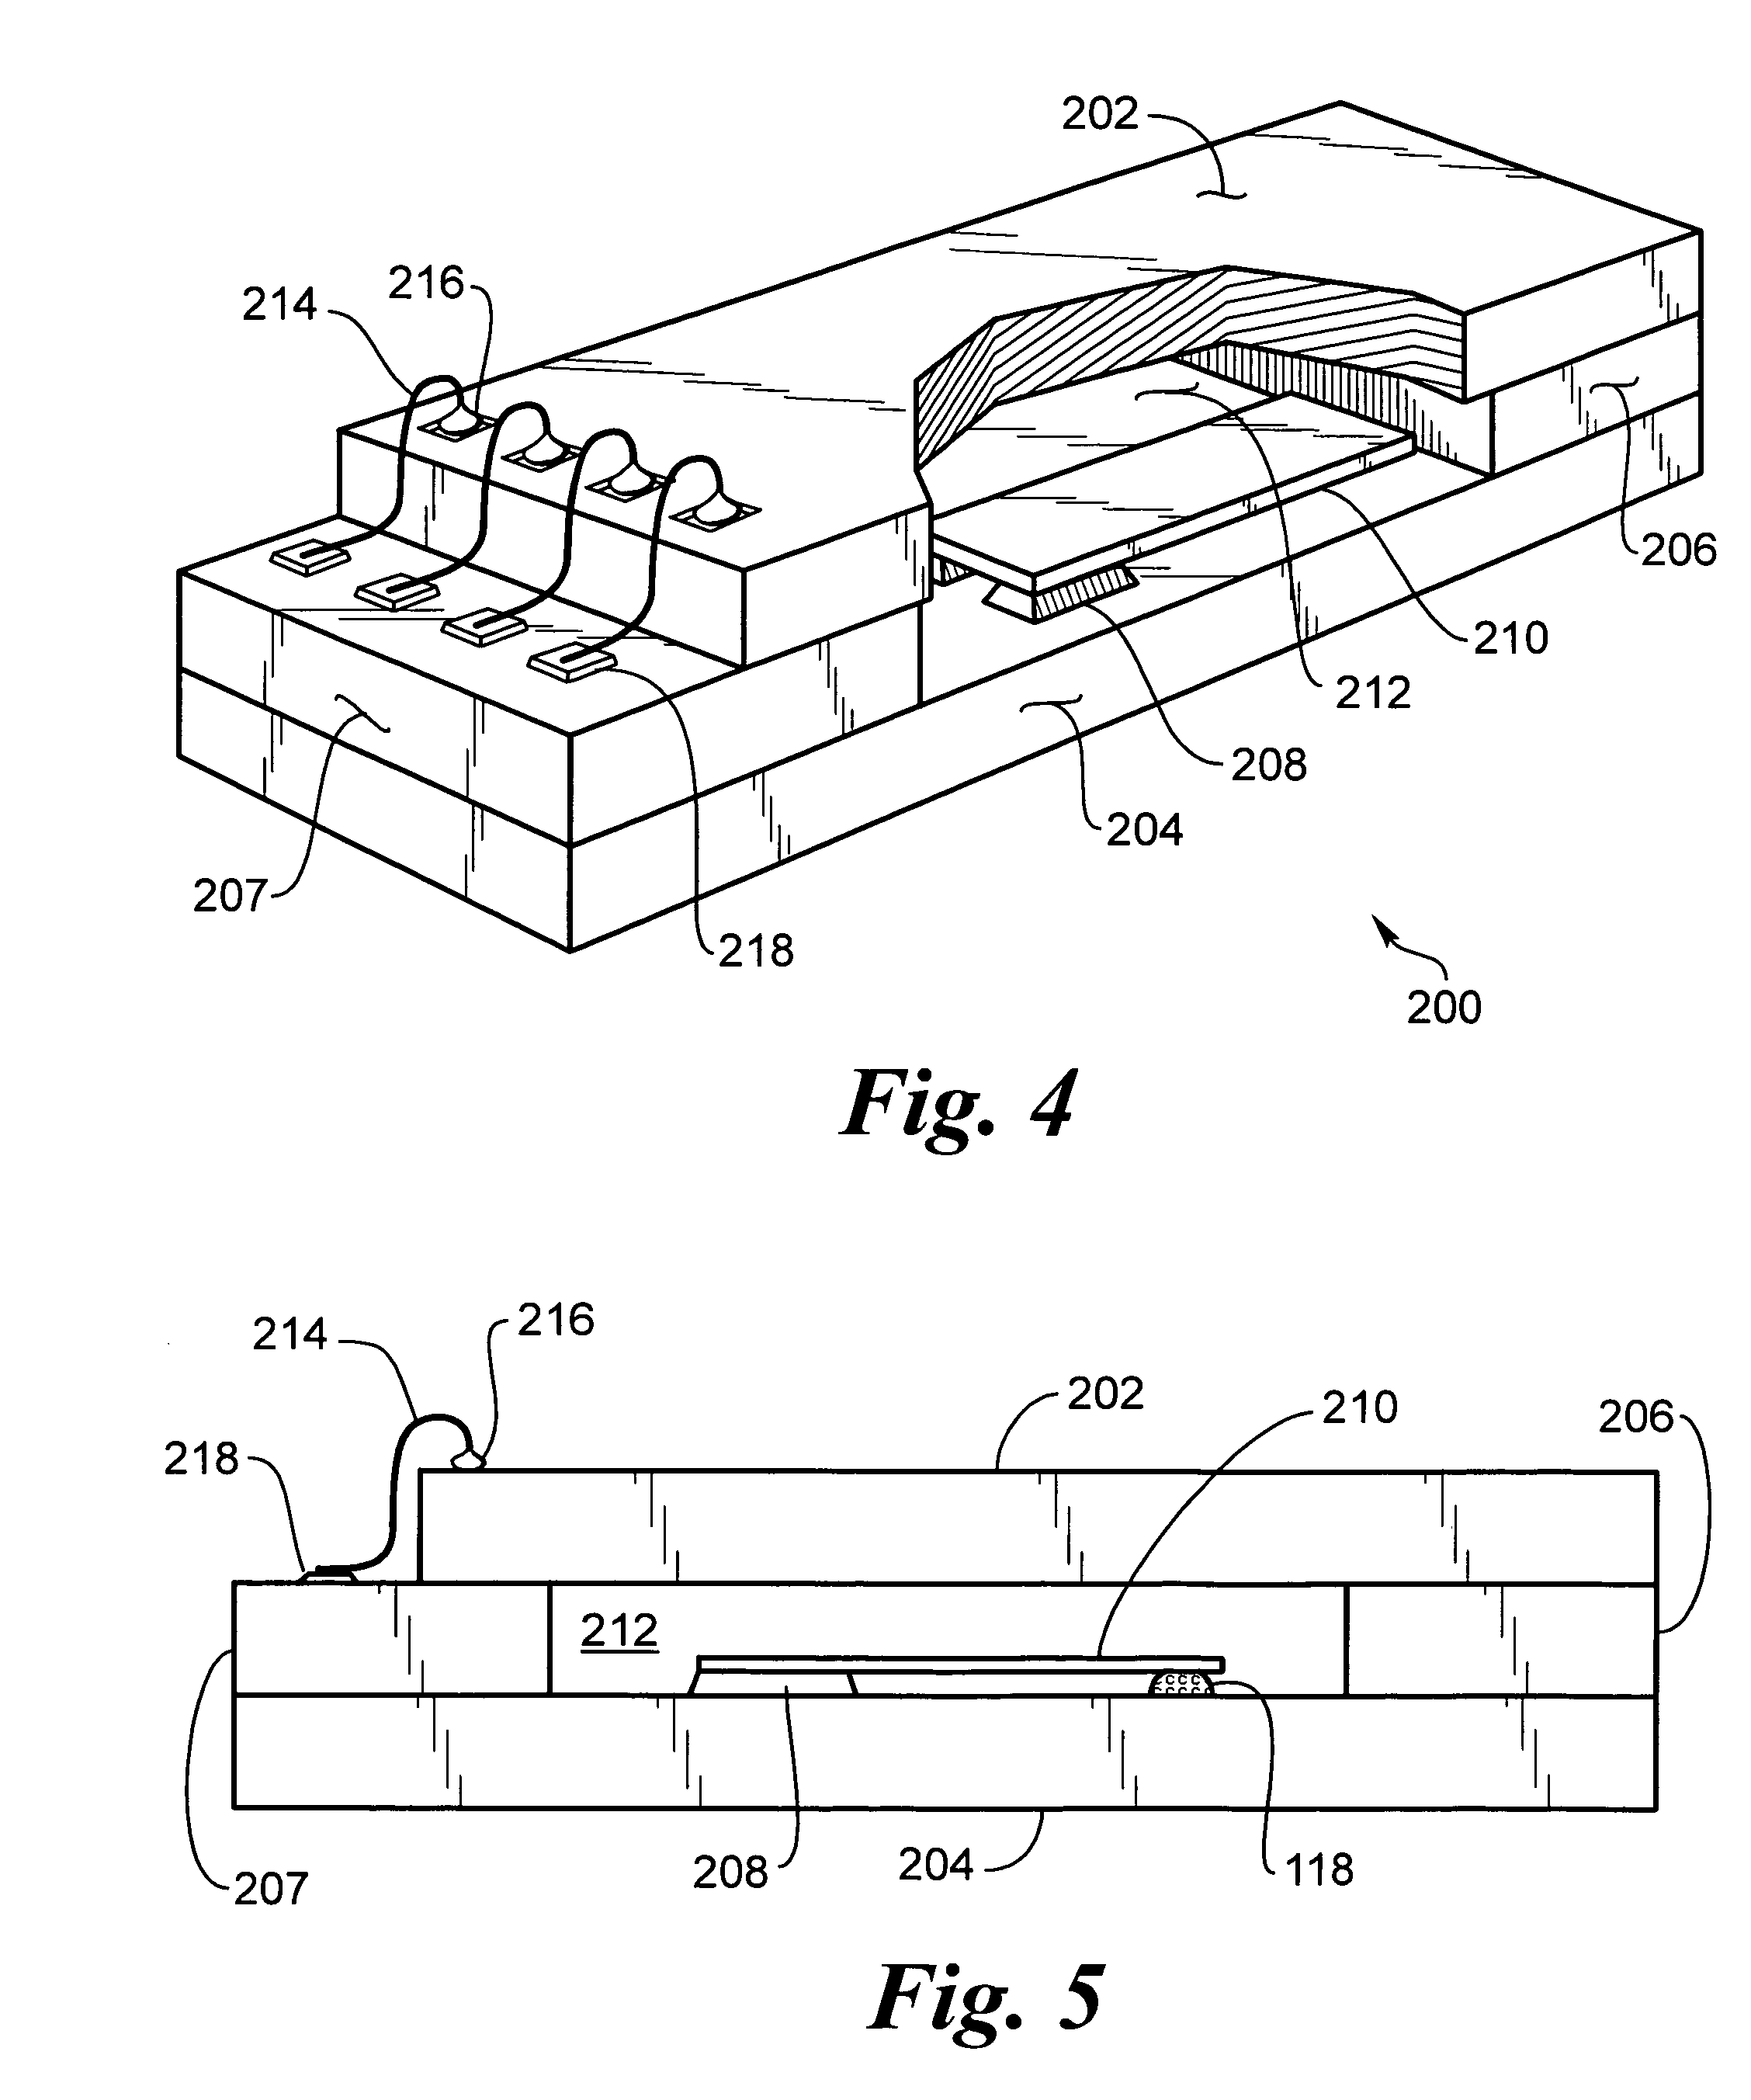 Piezoelectric device mounted on integrated circuit chip